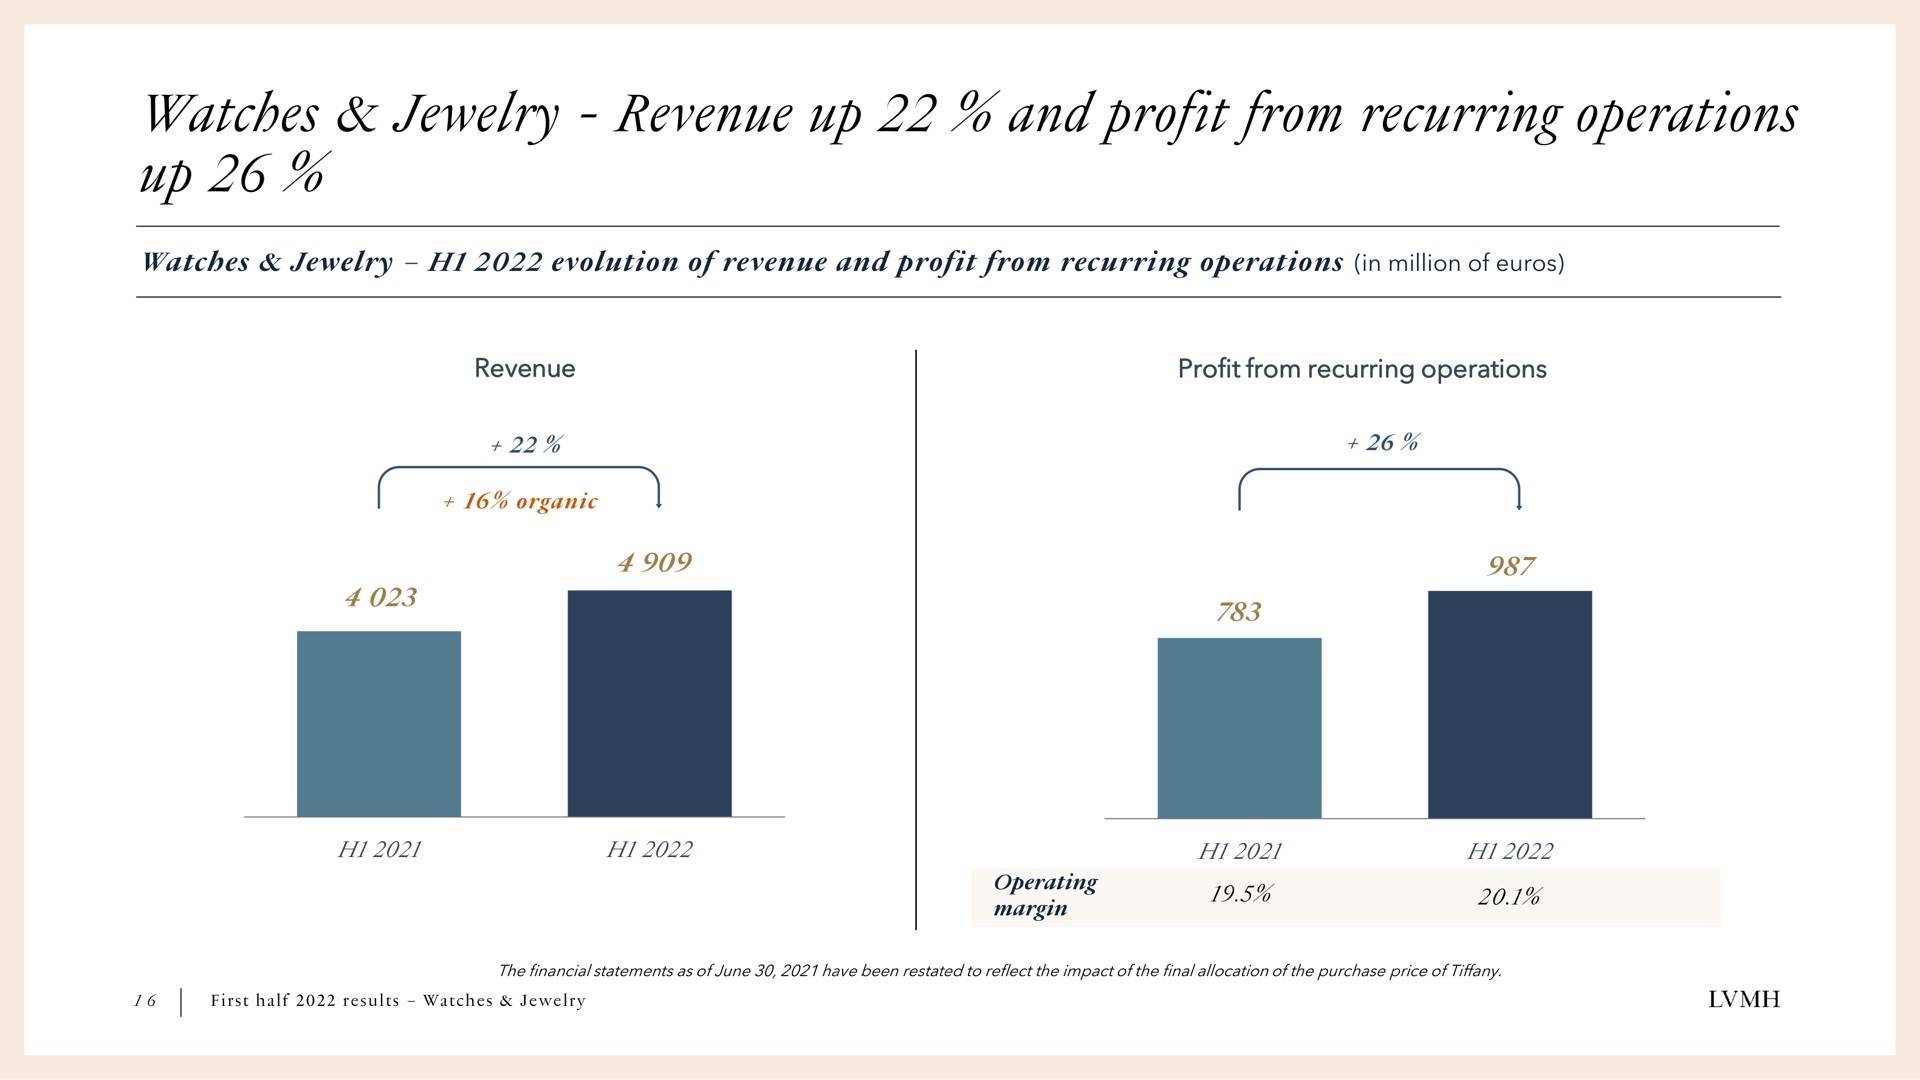 watches jewelry revenue up and profit from recurring operations up | LVMH